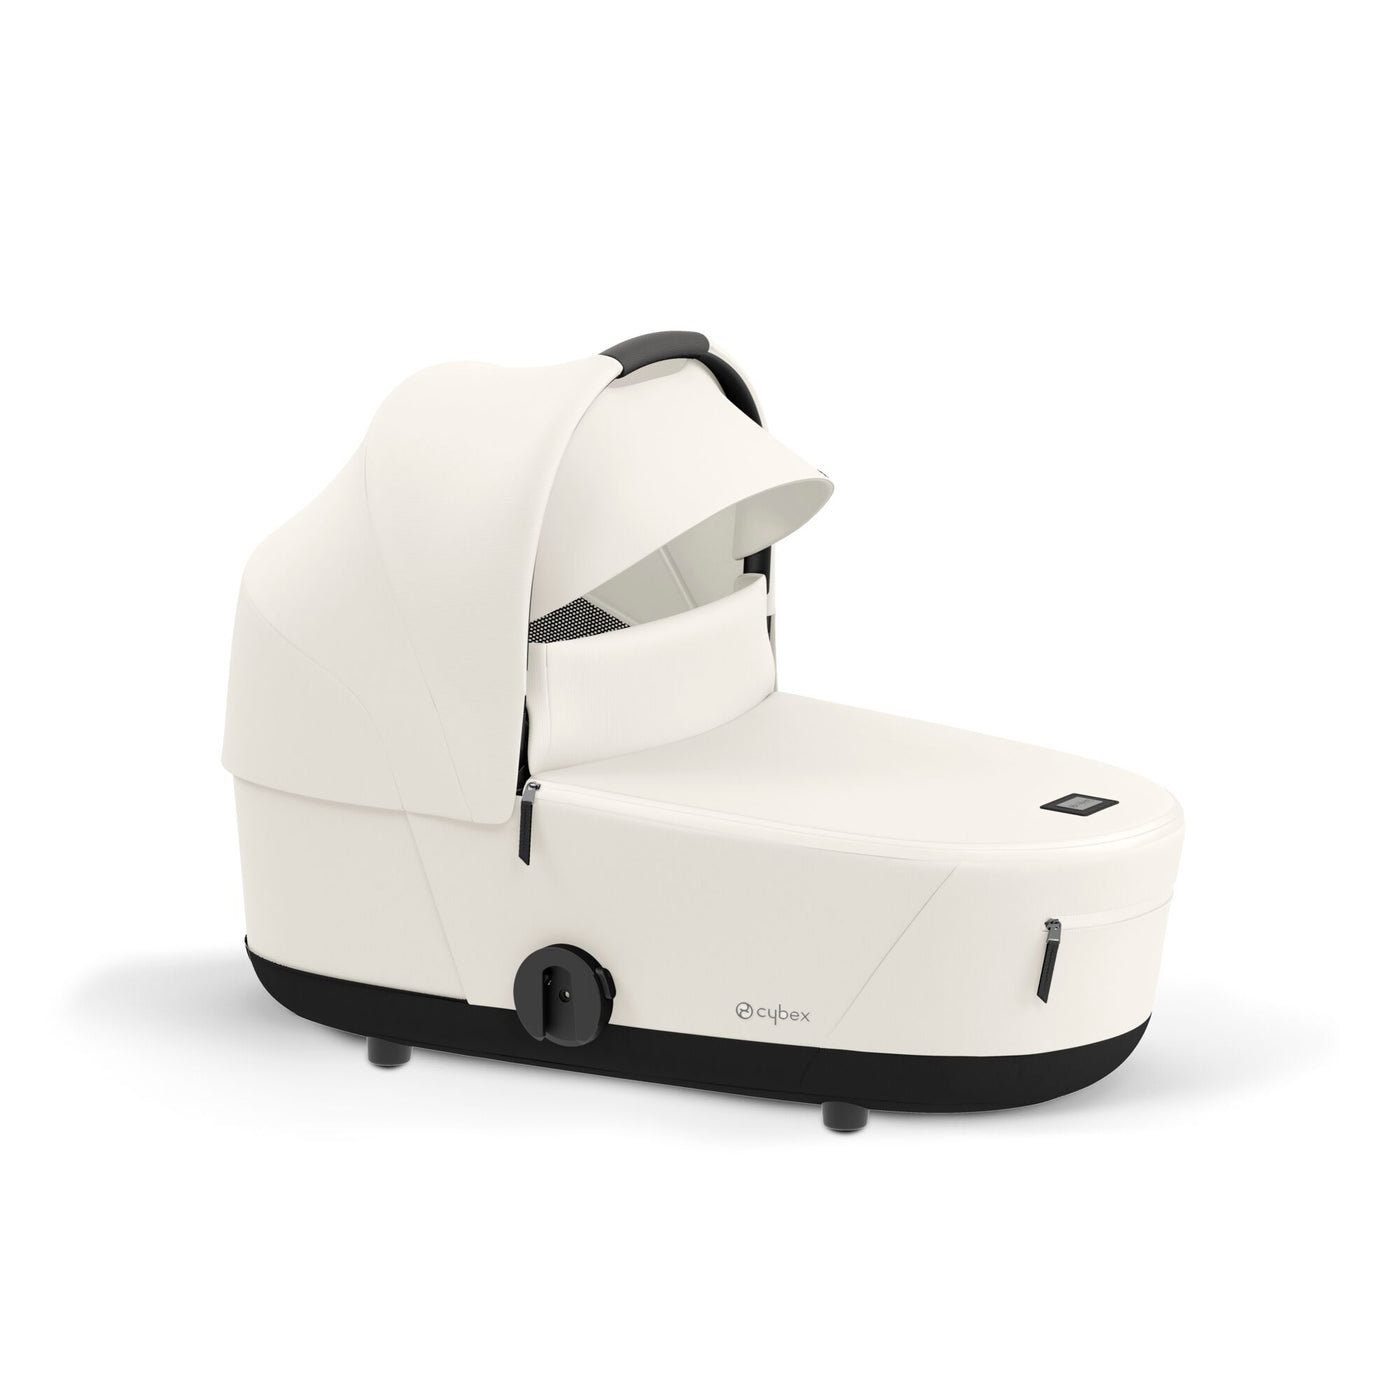 Cybex Mios Lux CarryCot - Off White